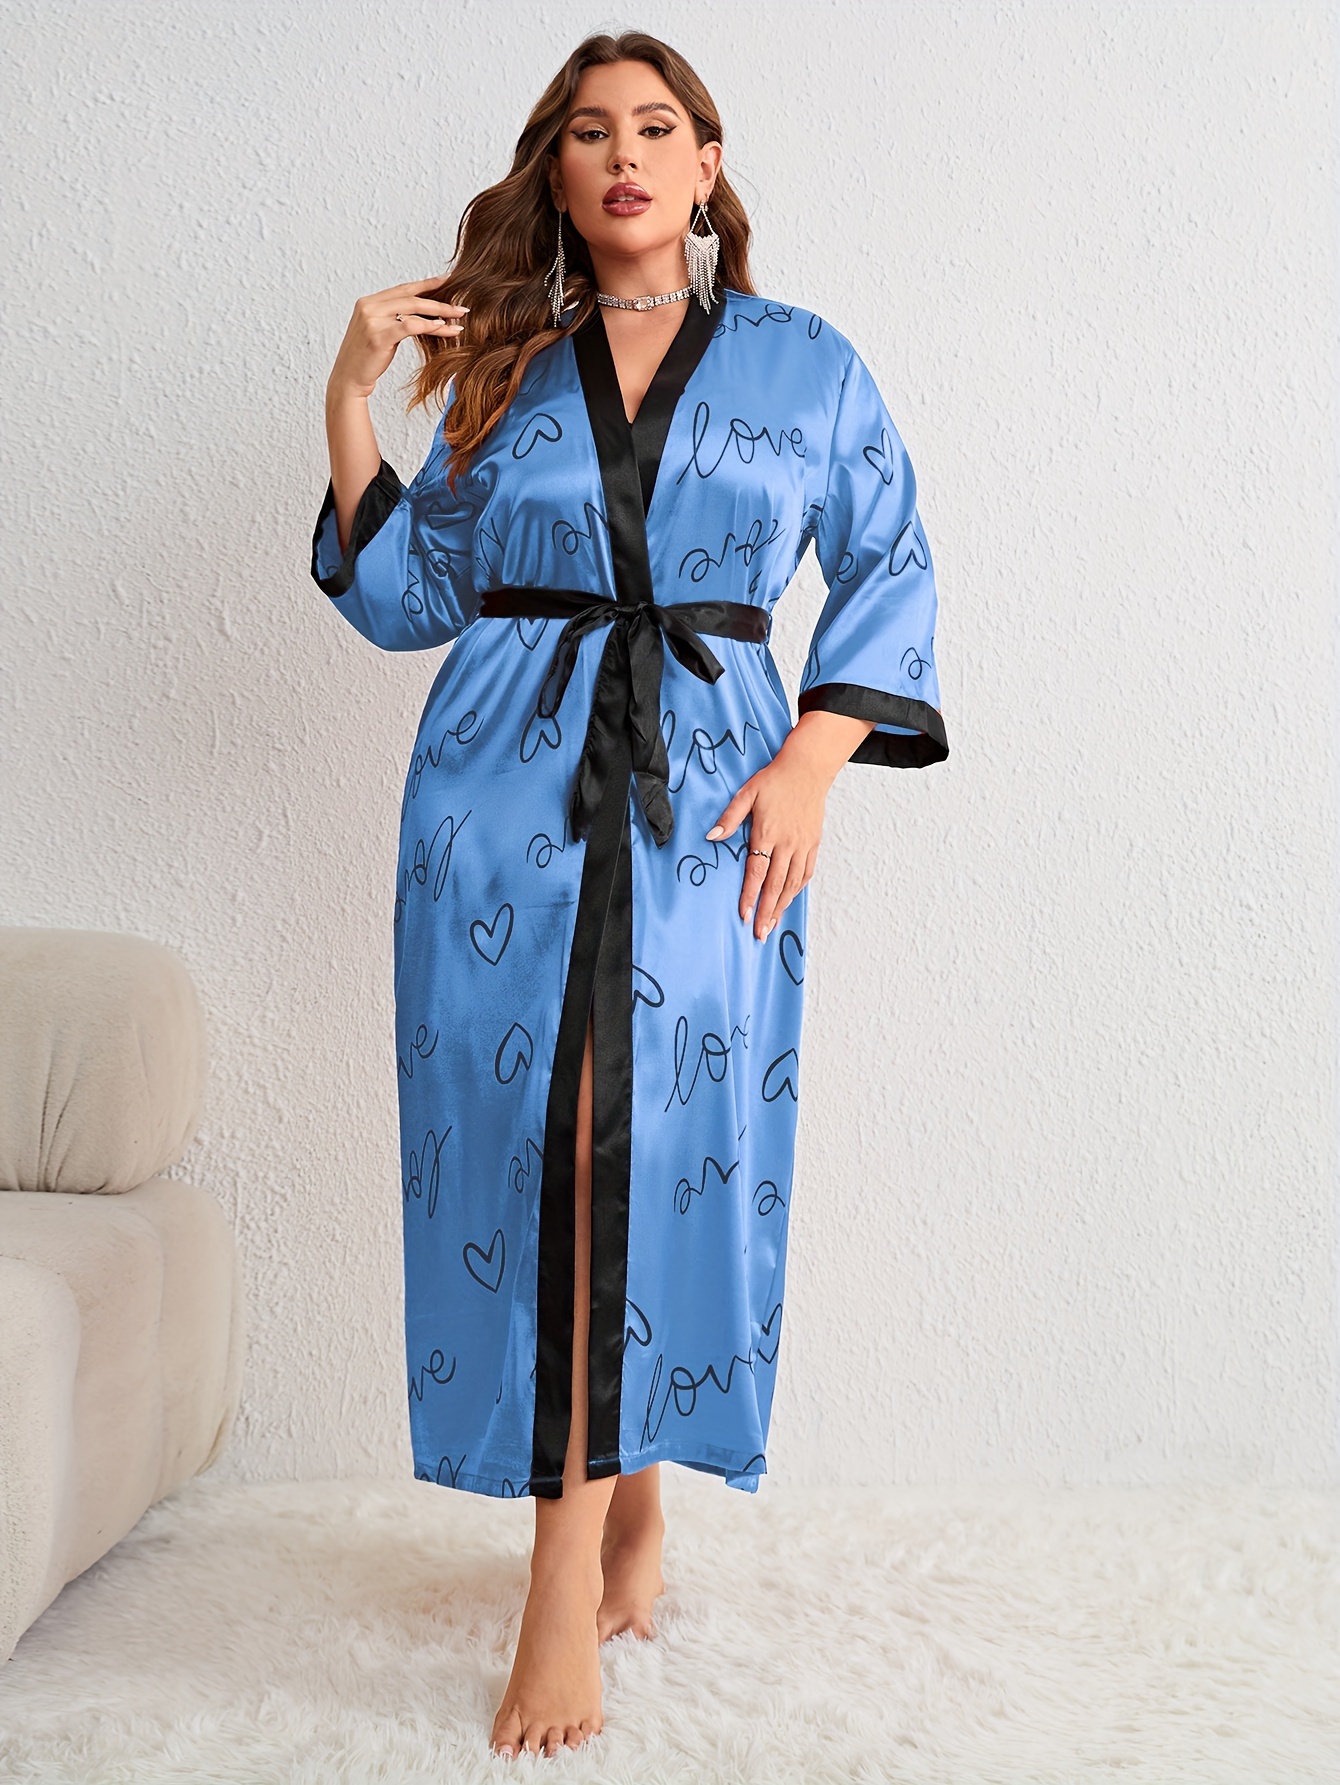  STJDM Nightgown,Winter Red Blue Women's Sleep Pajama Sets  Sleepwear Nightwear Suits Lace Plus Size 2 Pieces Robe Gown Sets M Blue :  Clothing, Shoes & Jewelry